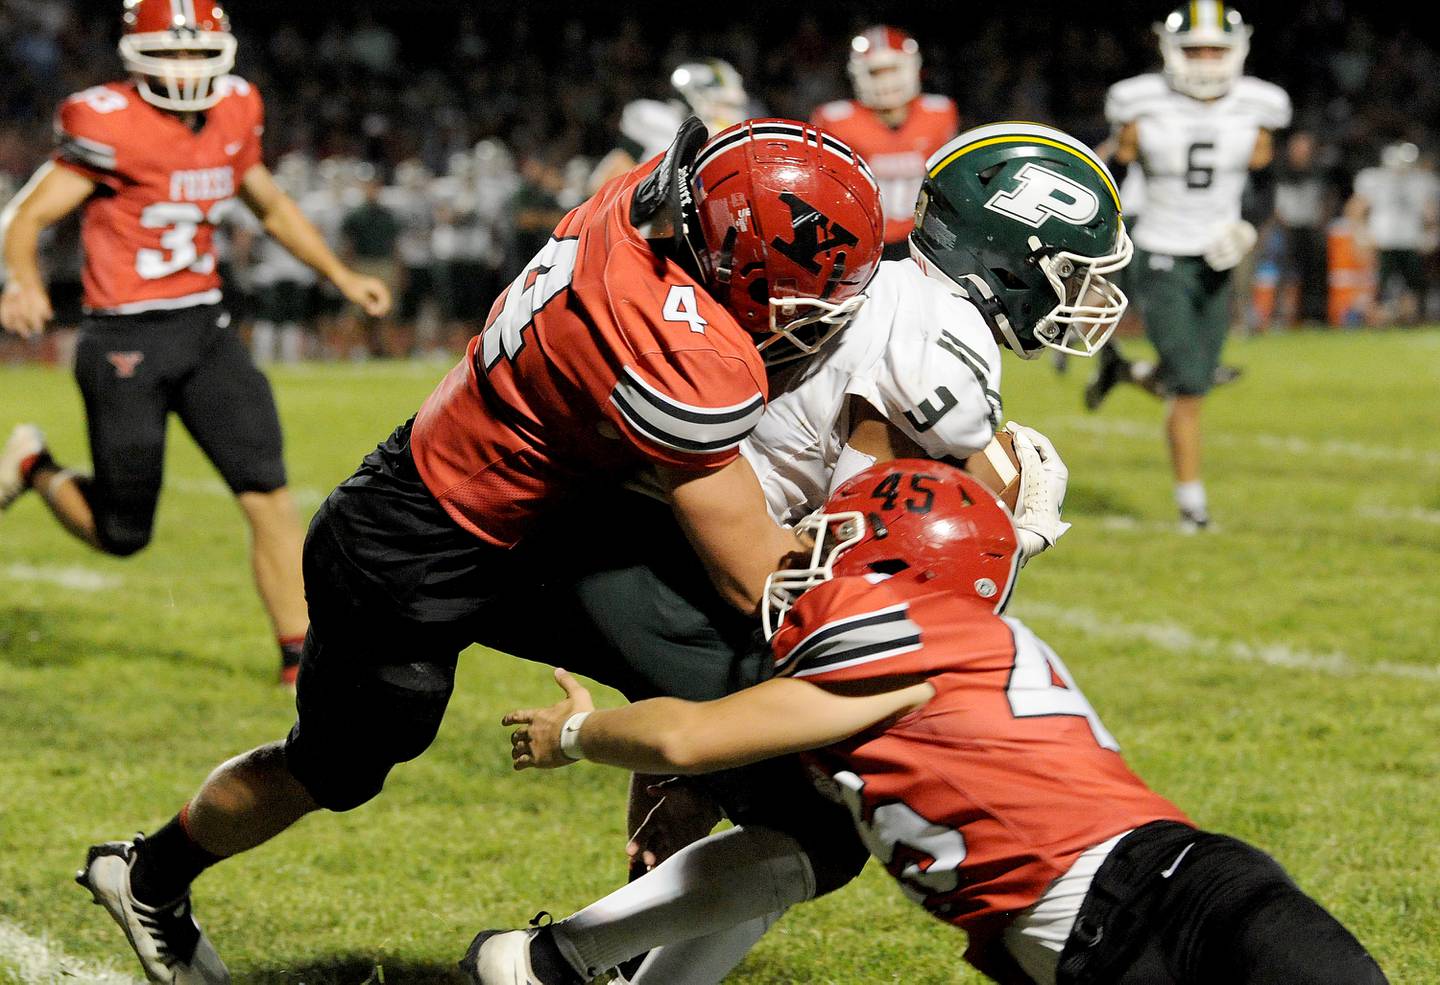 Yorkville defenders Kyle Gettemy (4) and Colten Stevens (45) bring down Plainfield Central runner Colby Williams (3) during a varsity football game at Yorkville High School on Friday, Sep. 2, 2022.